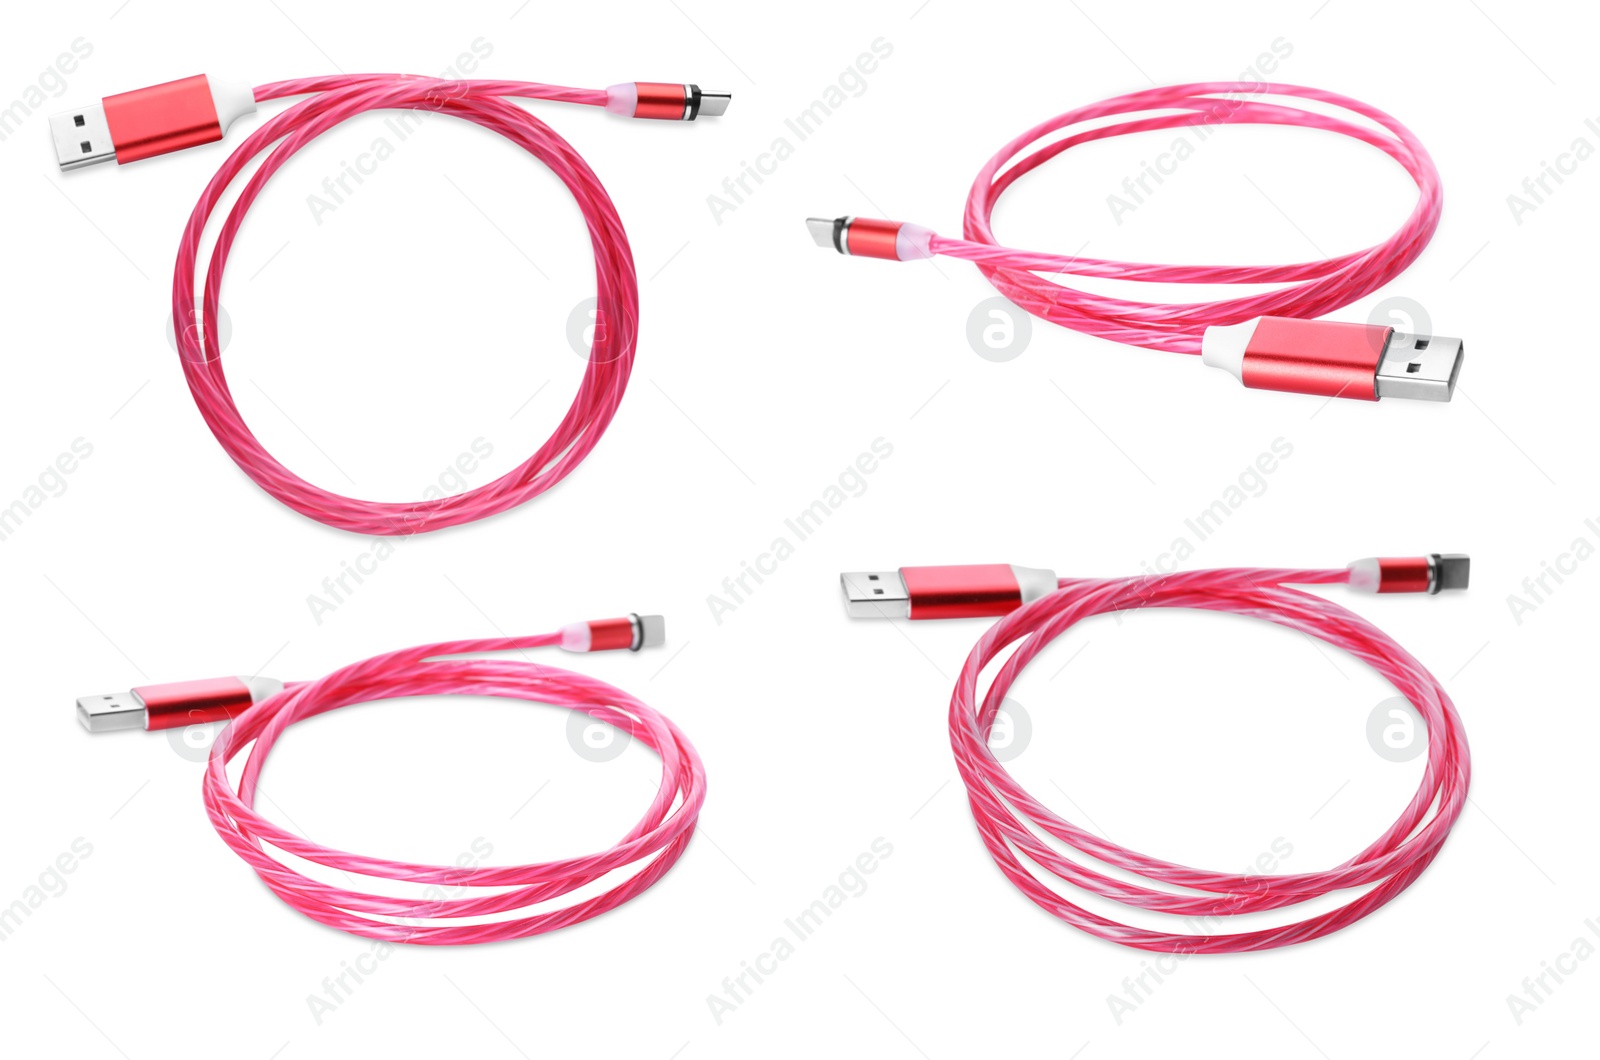 Image of Pink USB-C cable on white background, different angles